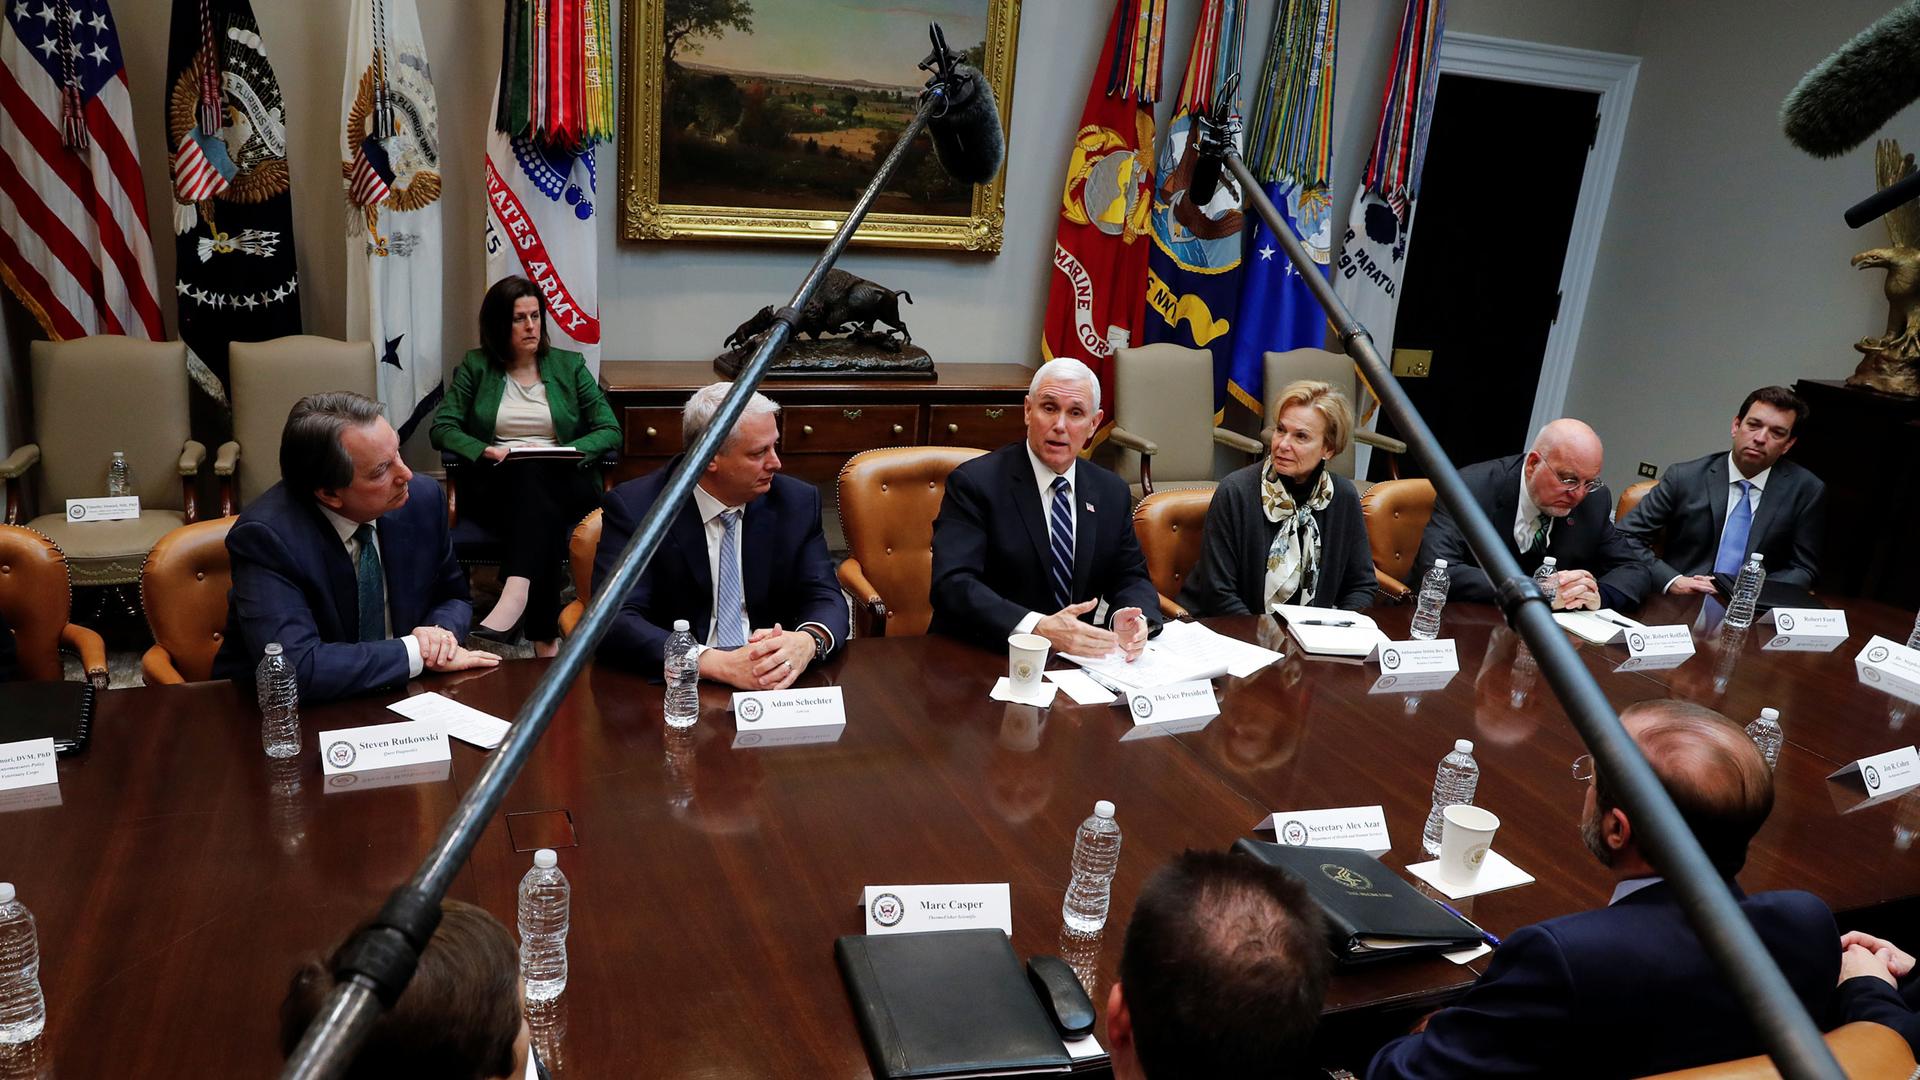 US Vice President Mike Pence is shown sitting at a table with people sitting all around him and microphones on boom polls hanging overhead.